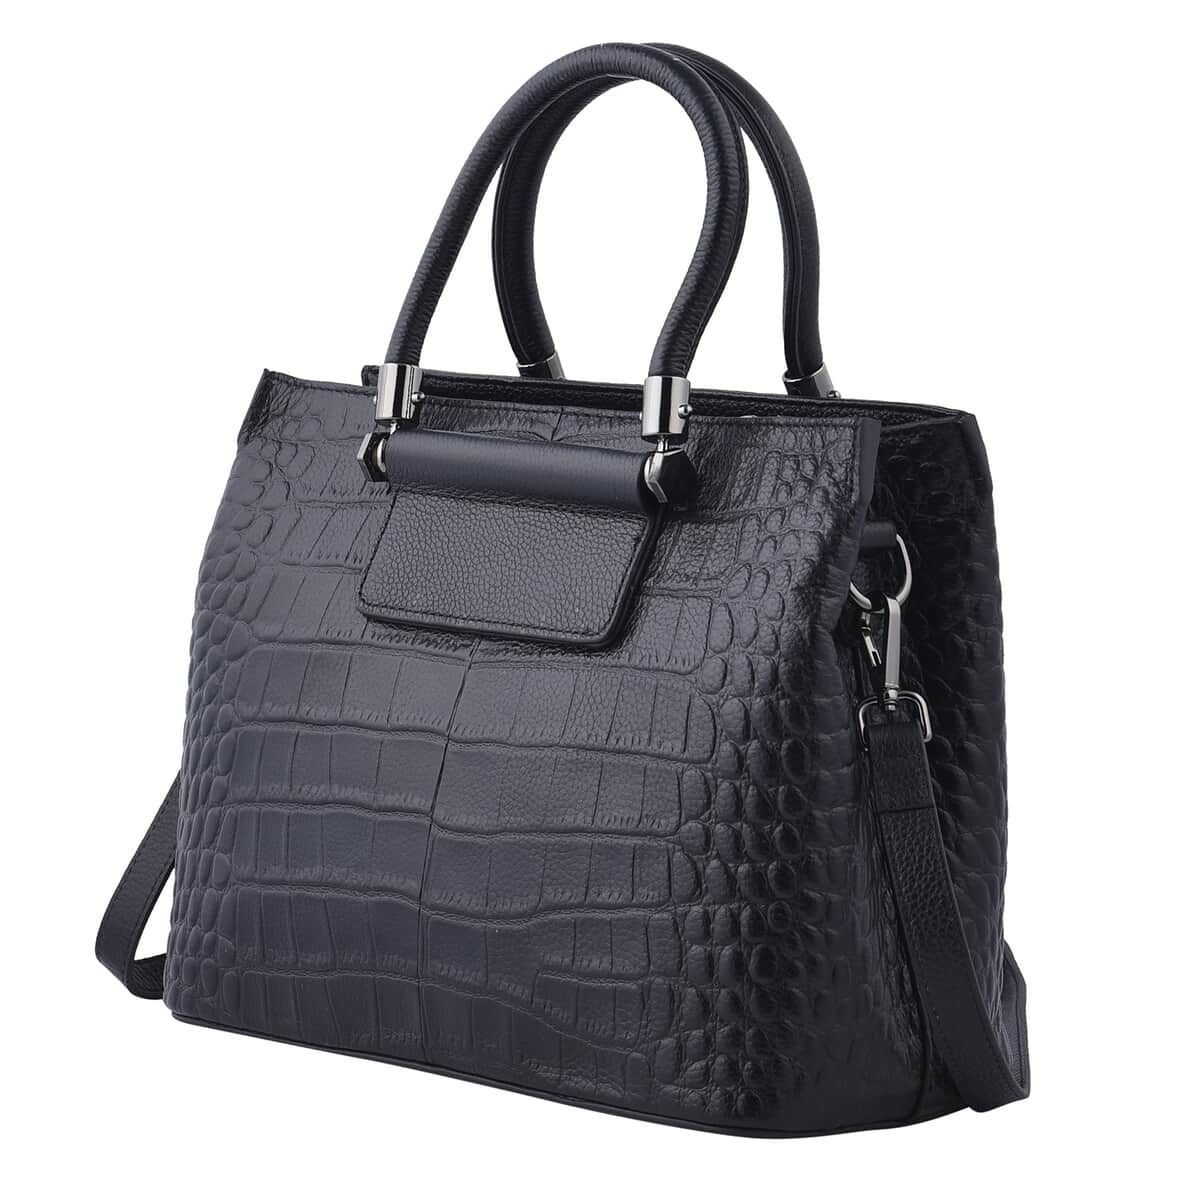 Black Crocodile Embossed Pattern Genuine Leather Convertible Bag (11.42"x4.33"x9.06") with Handle and Shoulder Straps image number 6